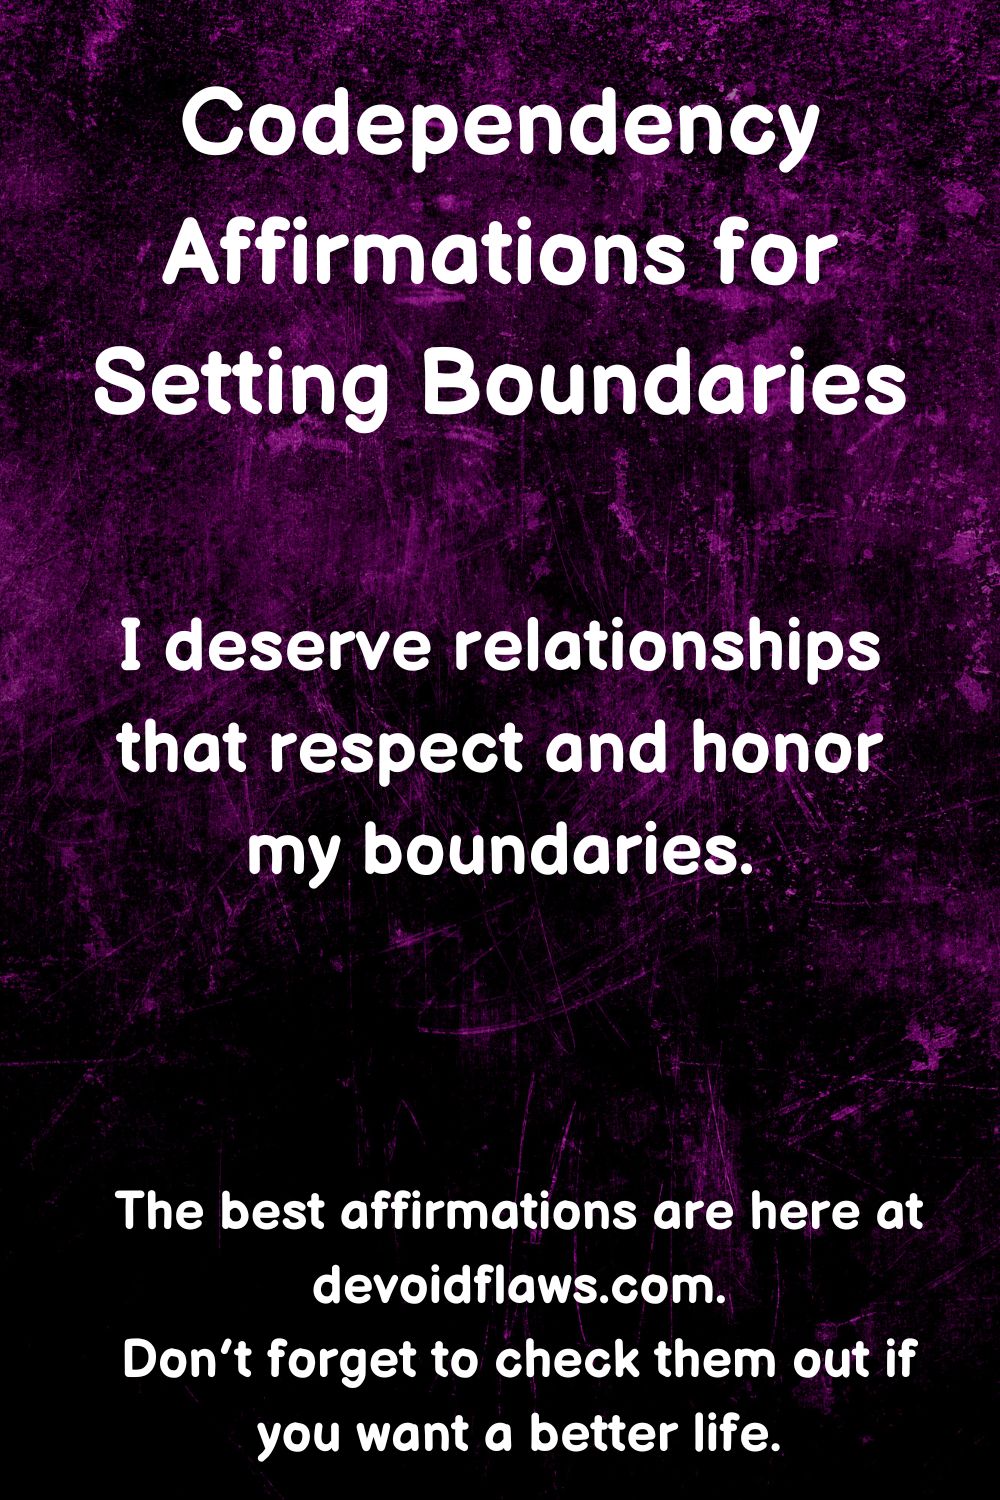 codependency affirmation for setting boundaries